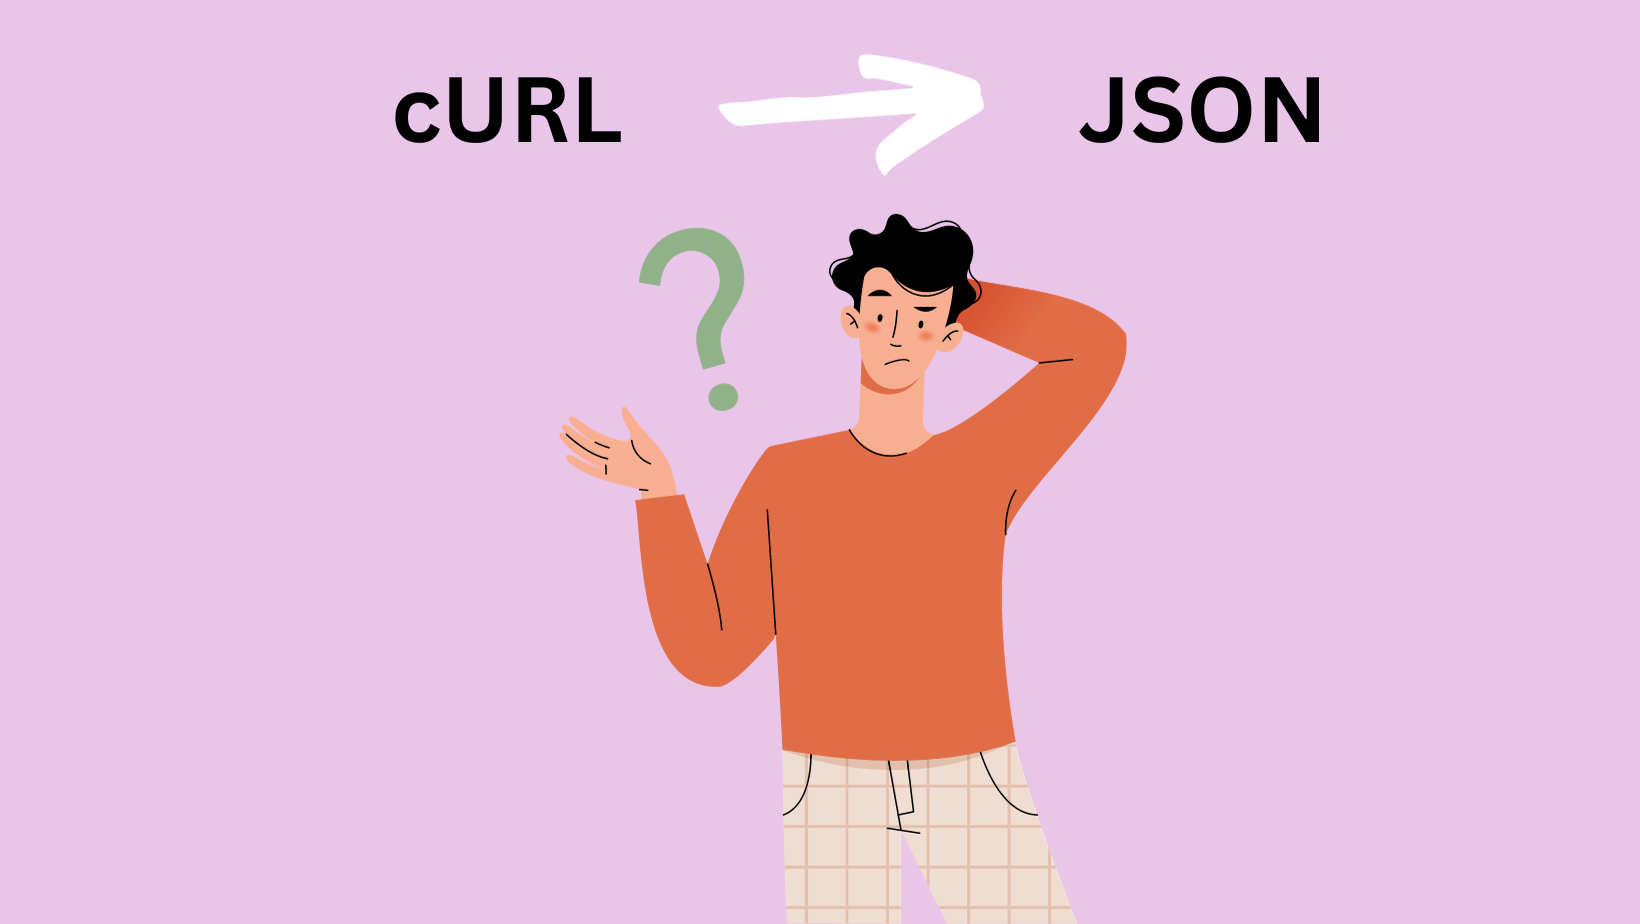 How to get JSON with cURL?